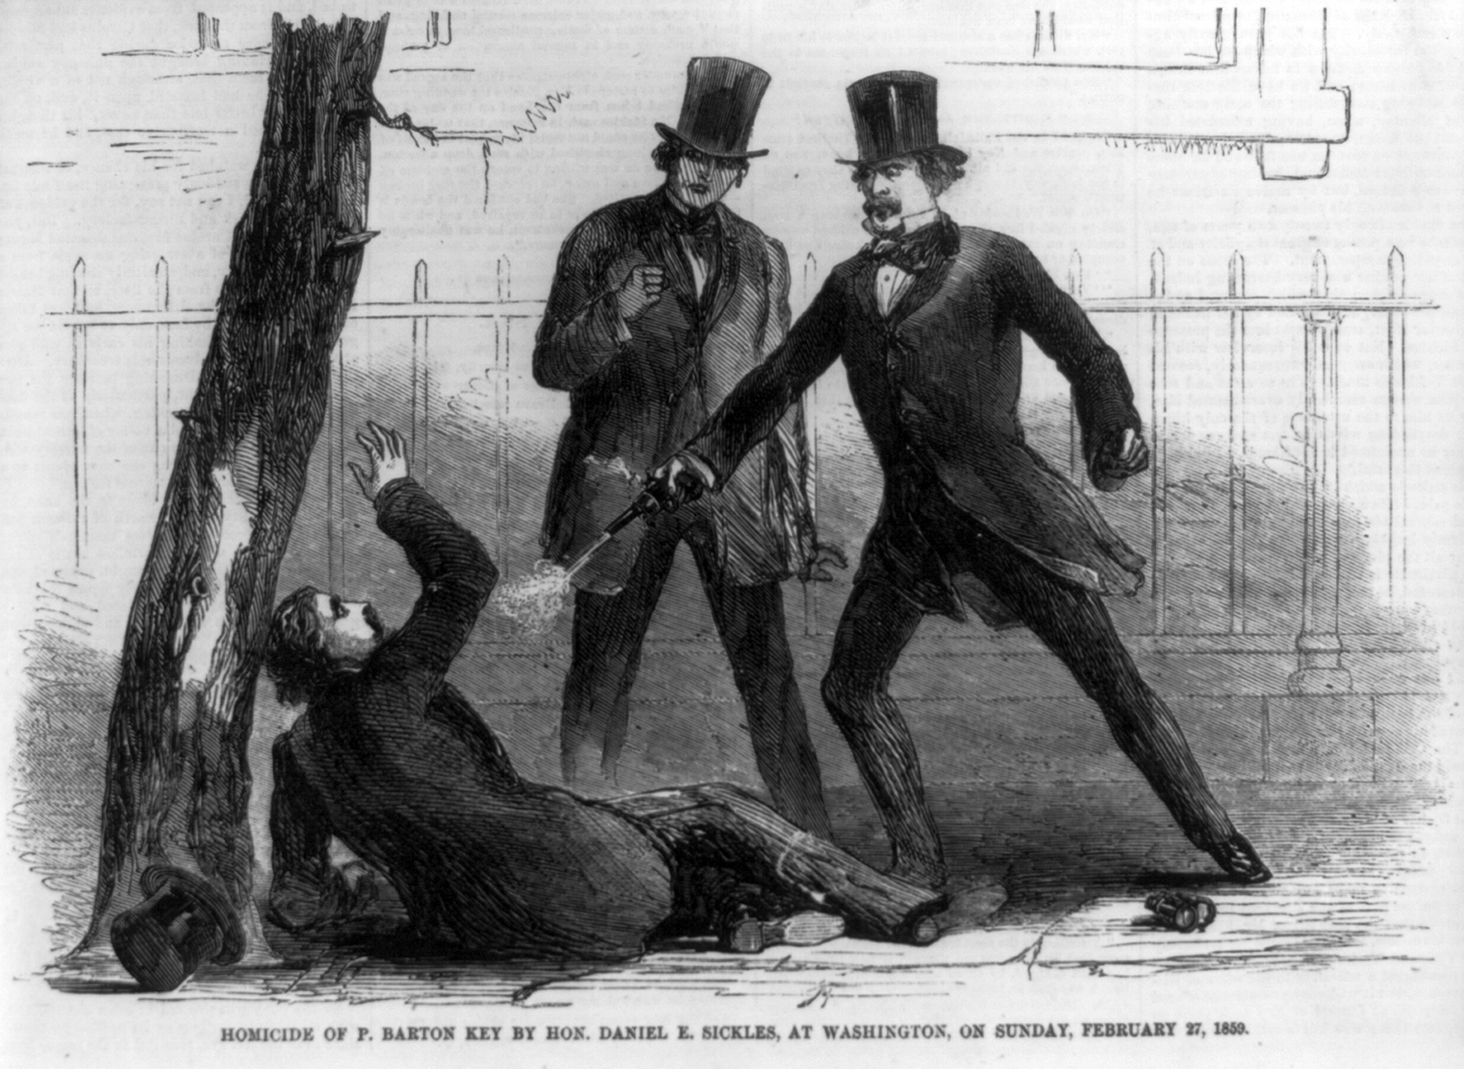 Stanton successfully defended Sickles in the murder of Key, who was having an affair with his wife.